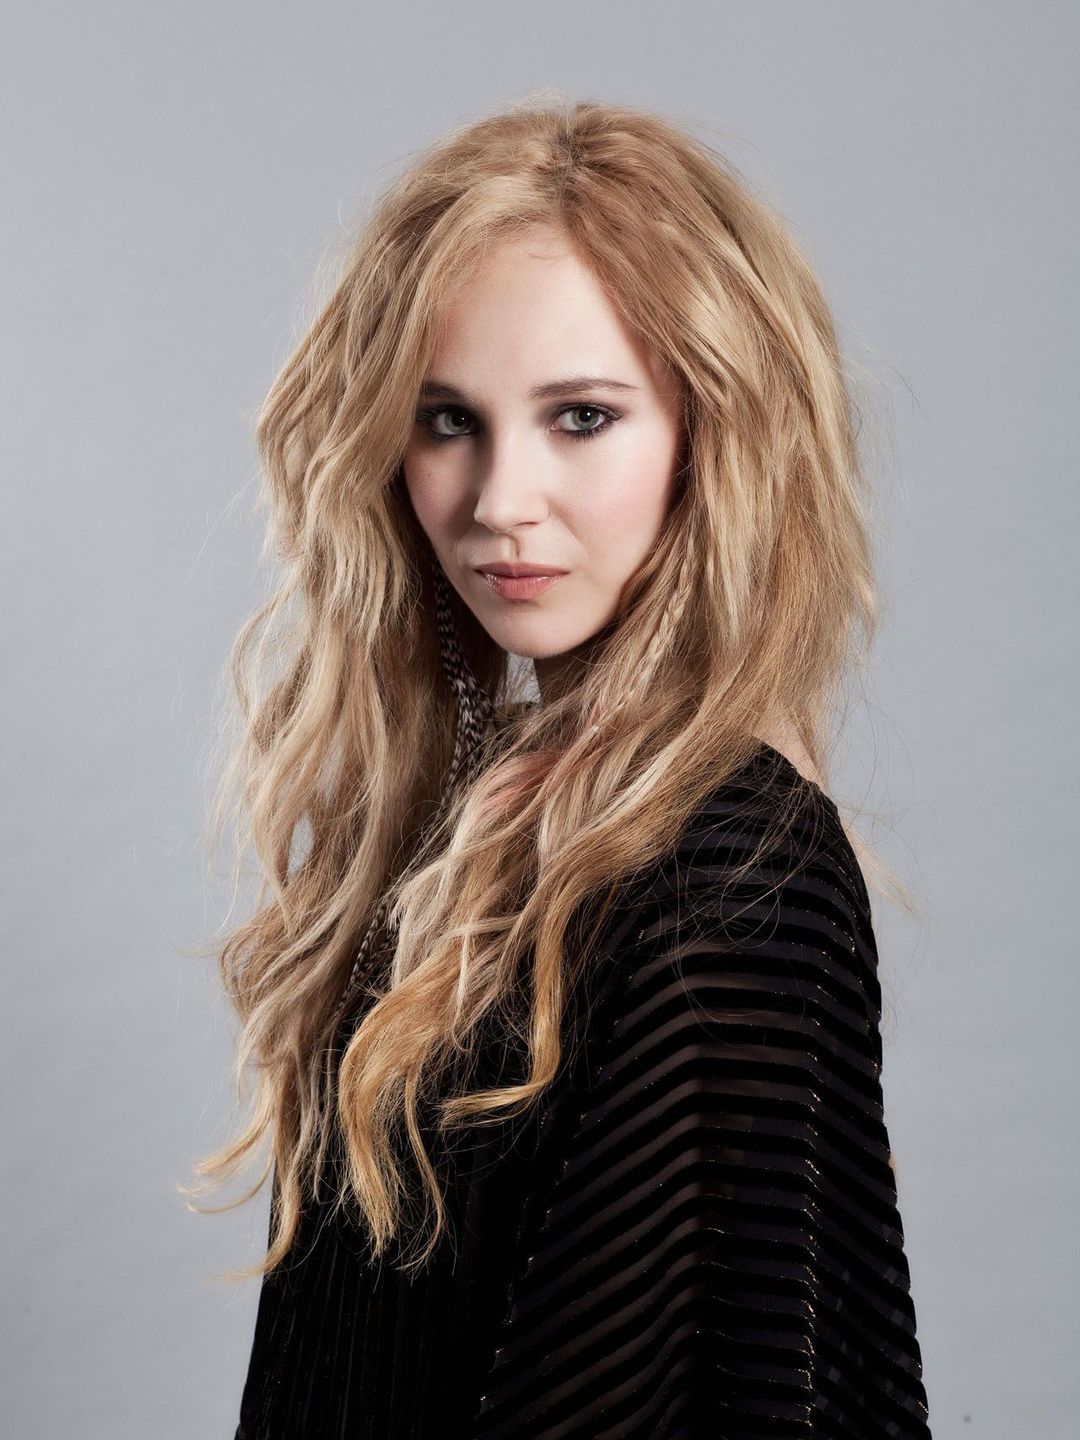 Juno Temple young age